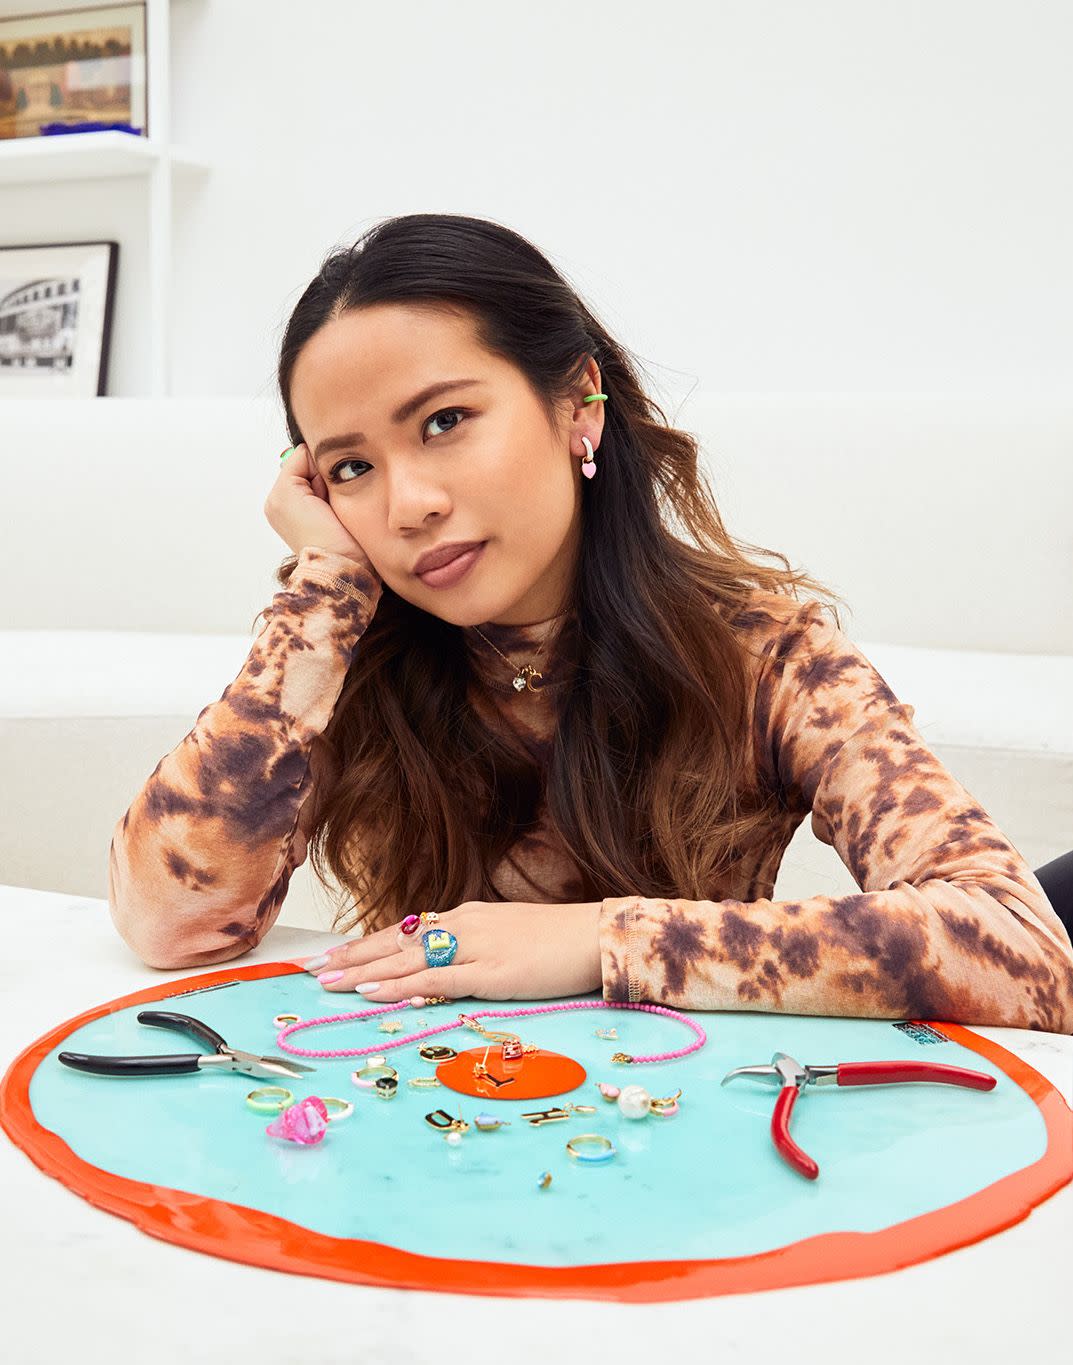 designer clare ngai sits in front of a turquoise and orange tray of colorful jewelry and pliers